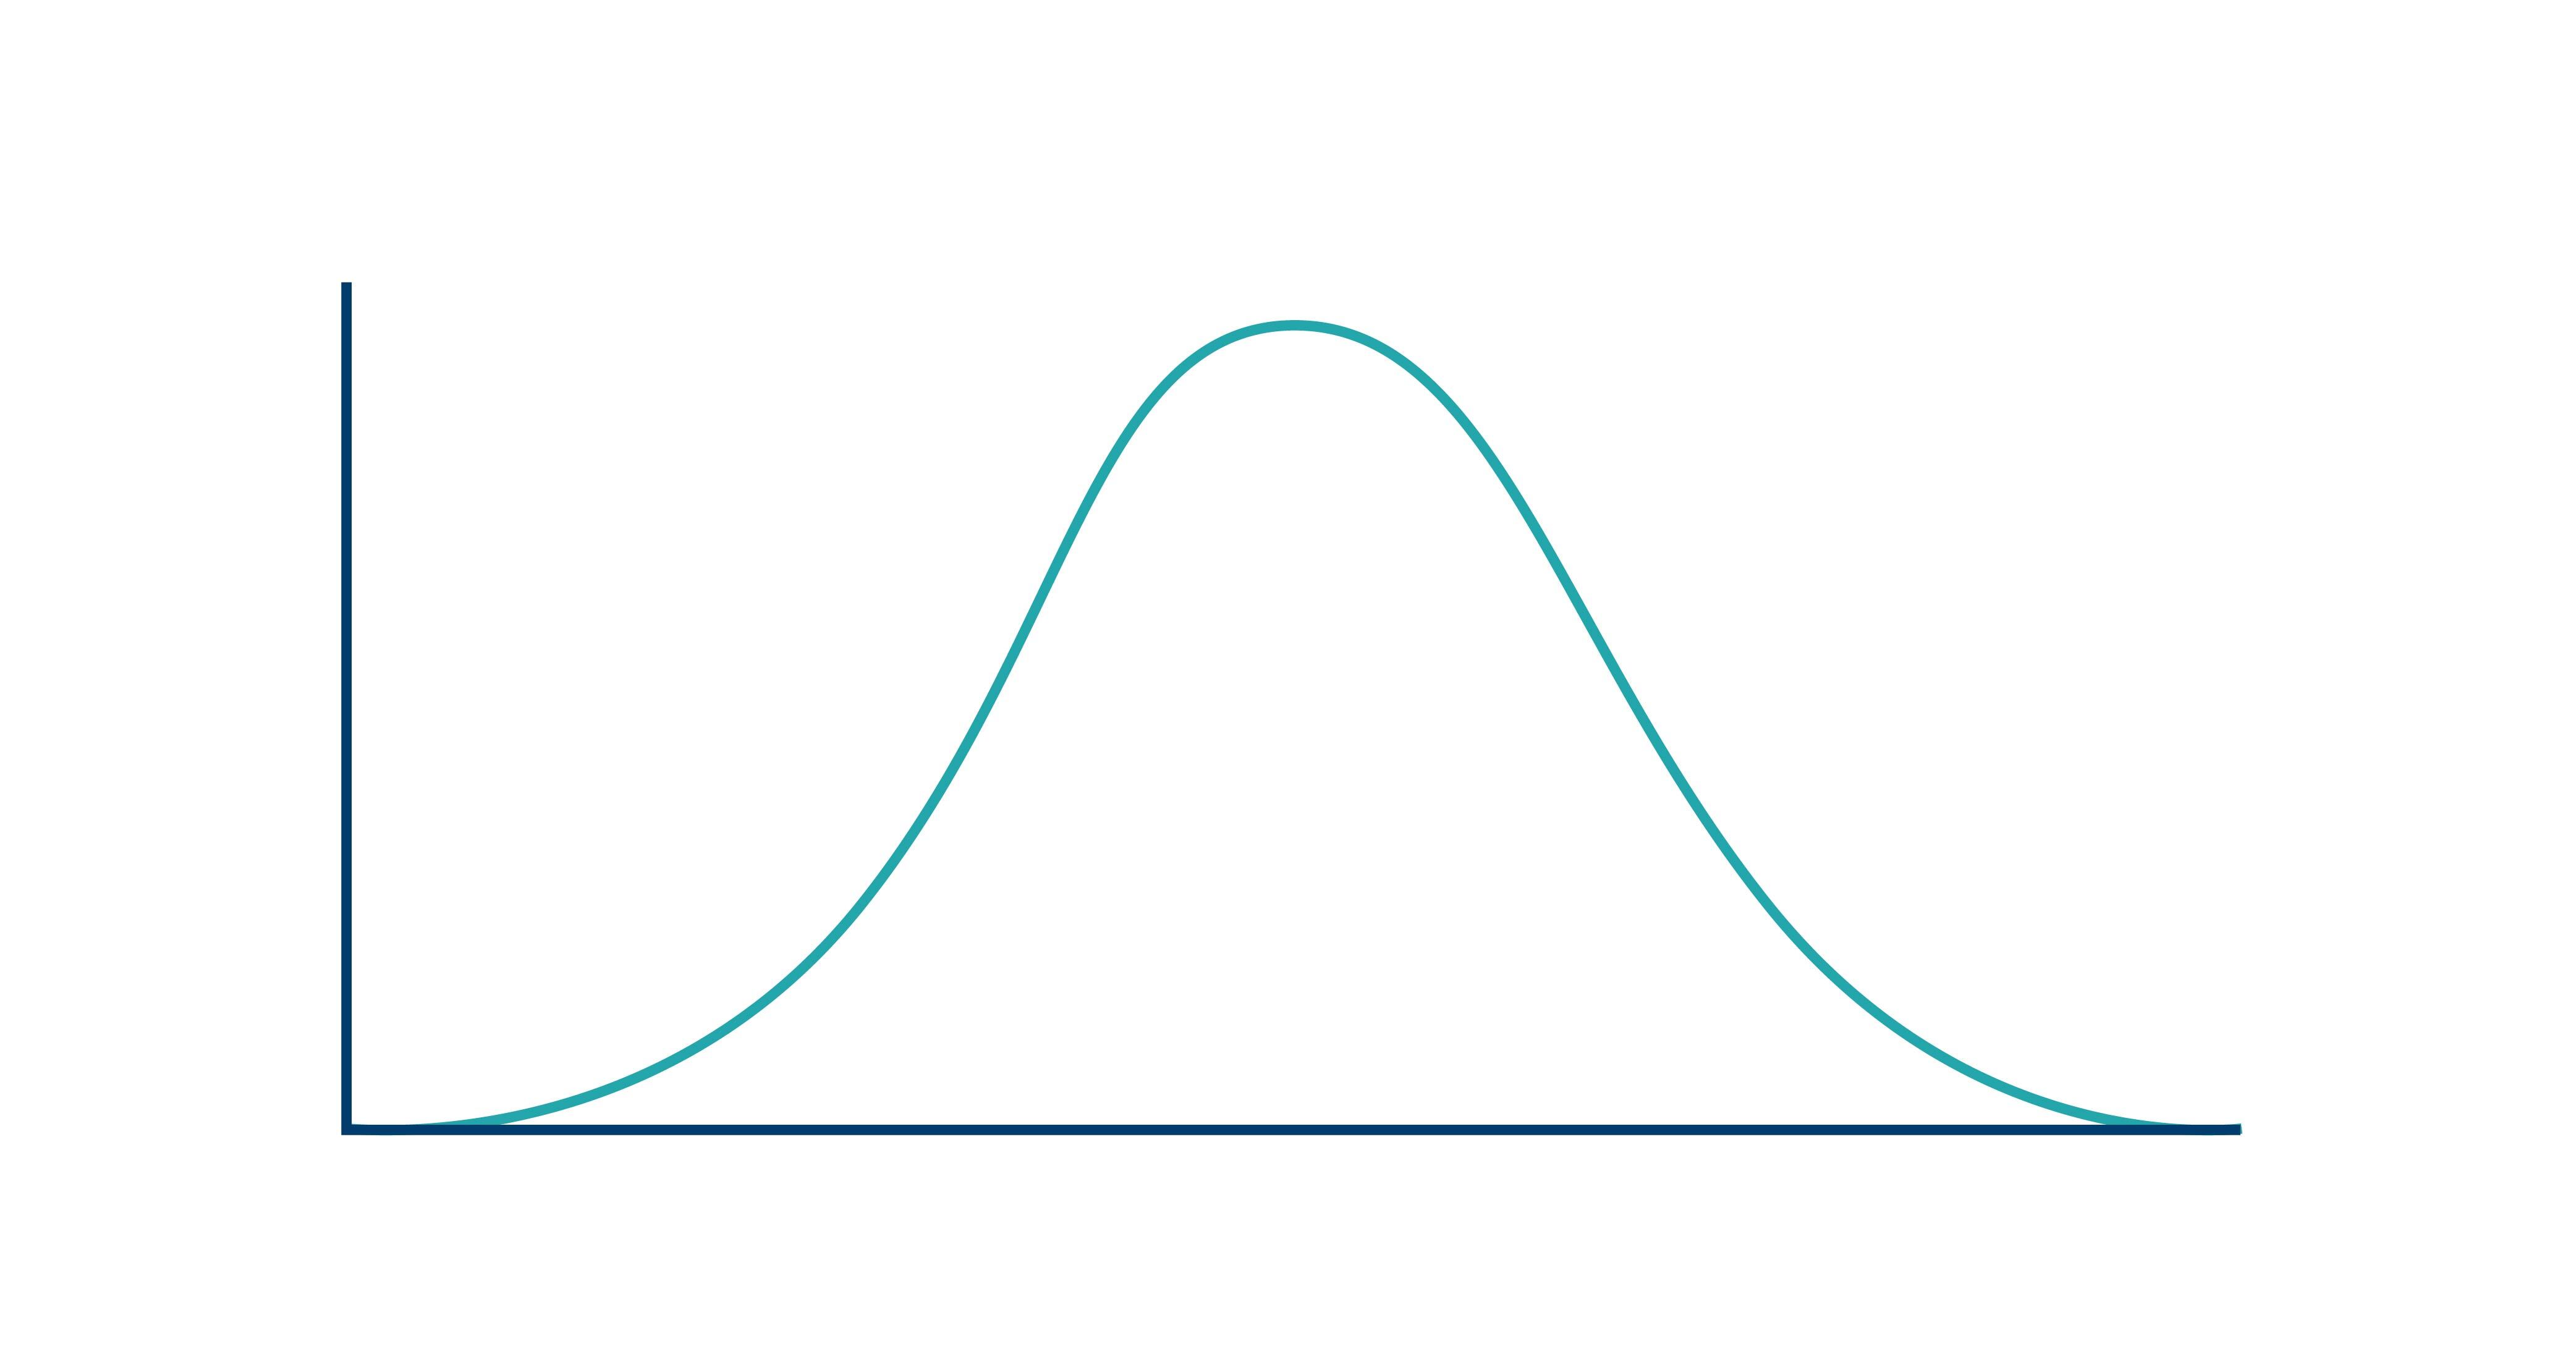 A normal distribution for any given metric will look like this.